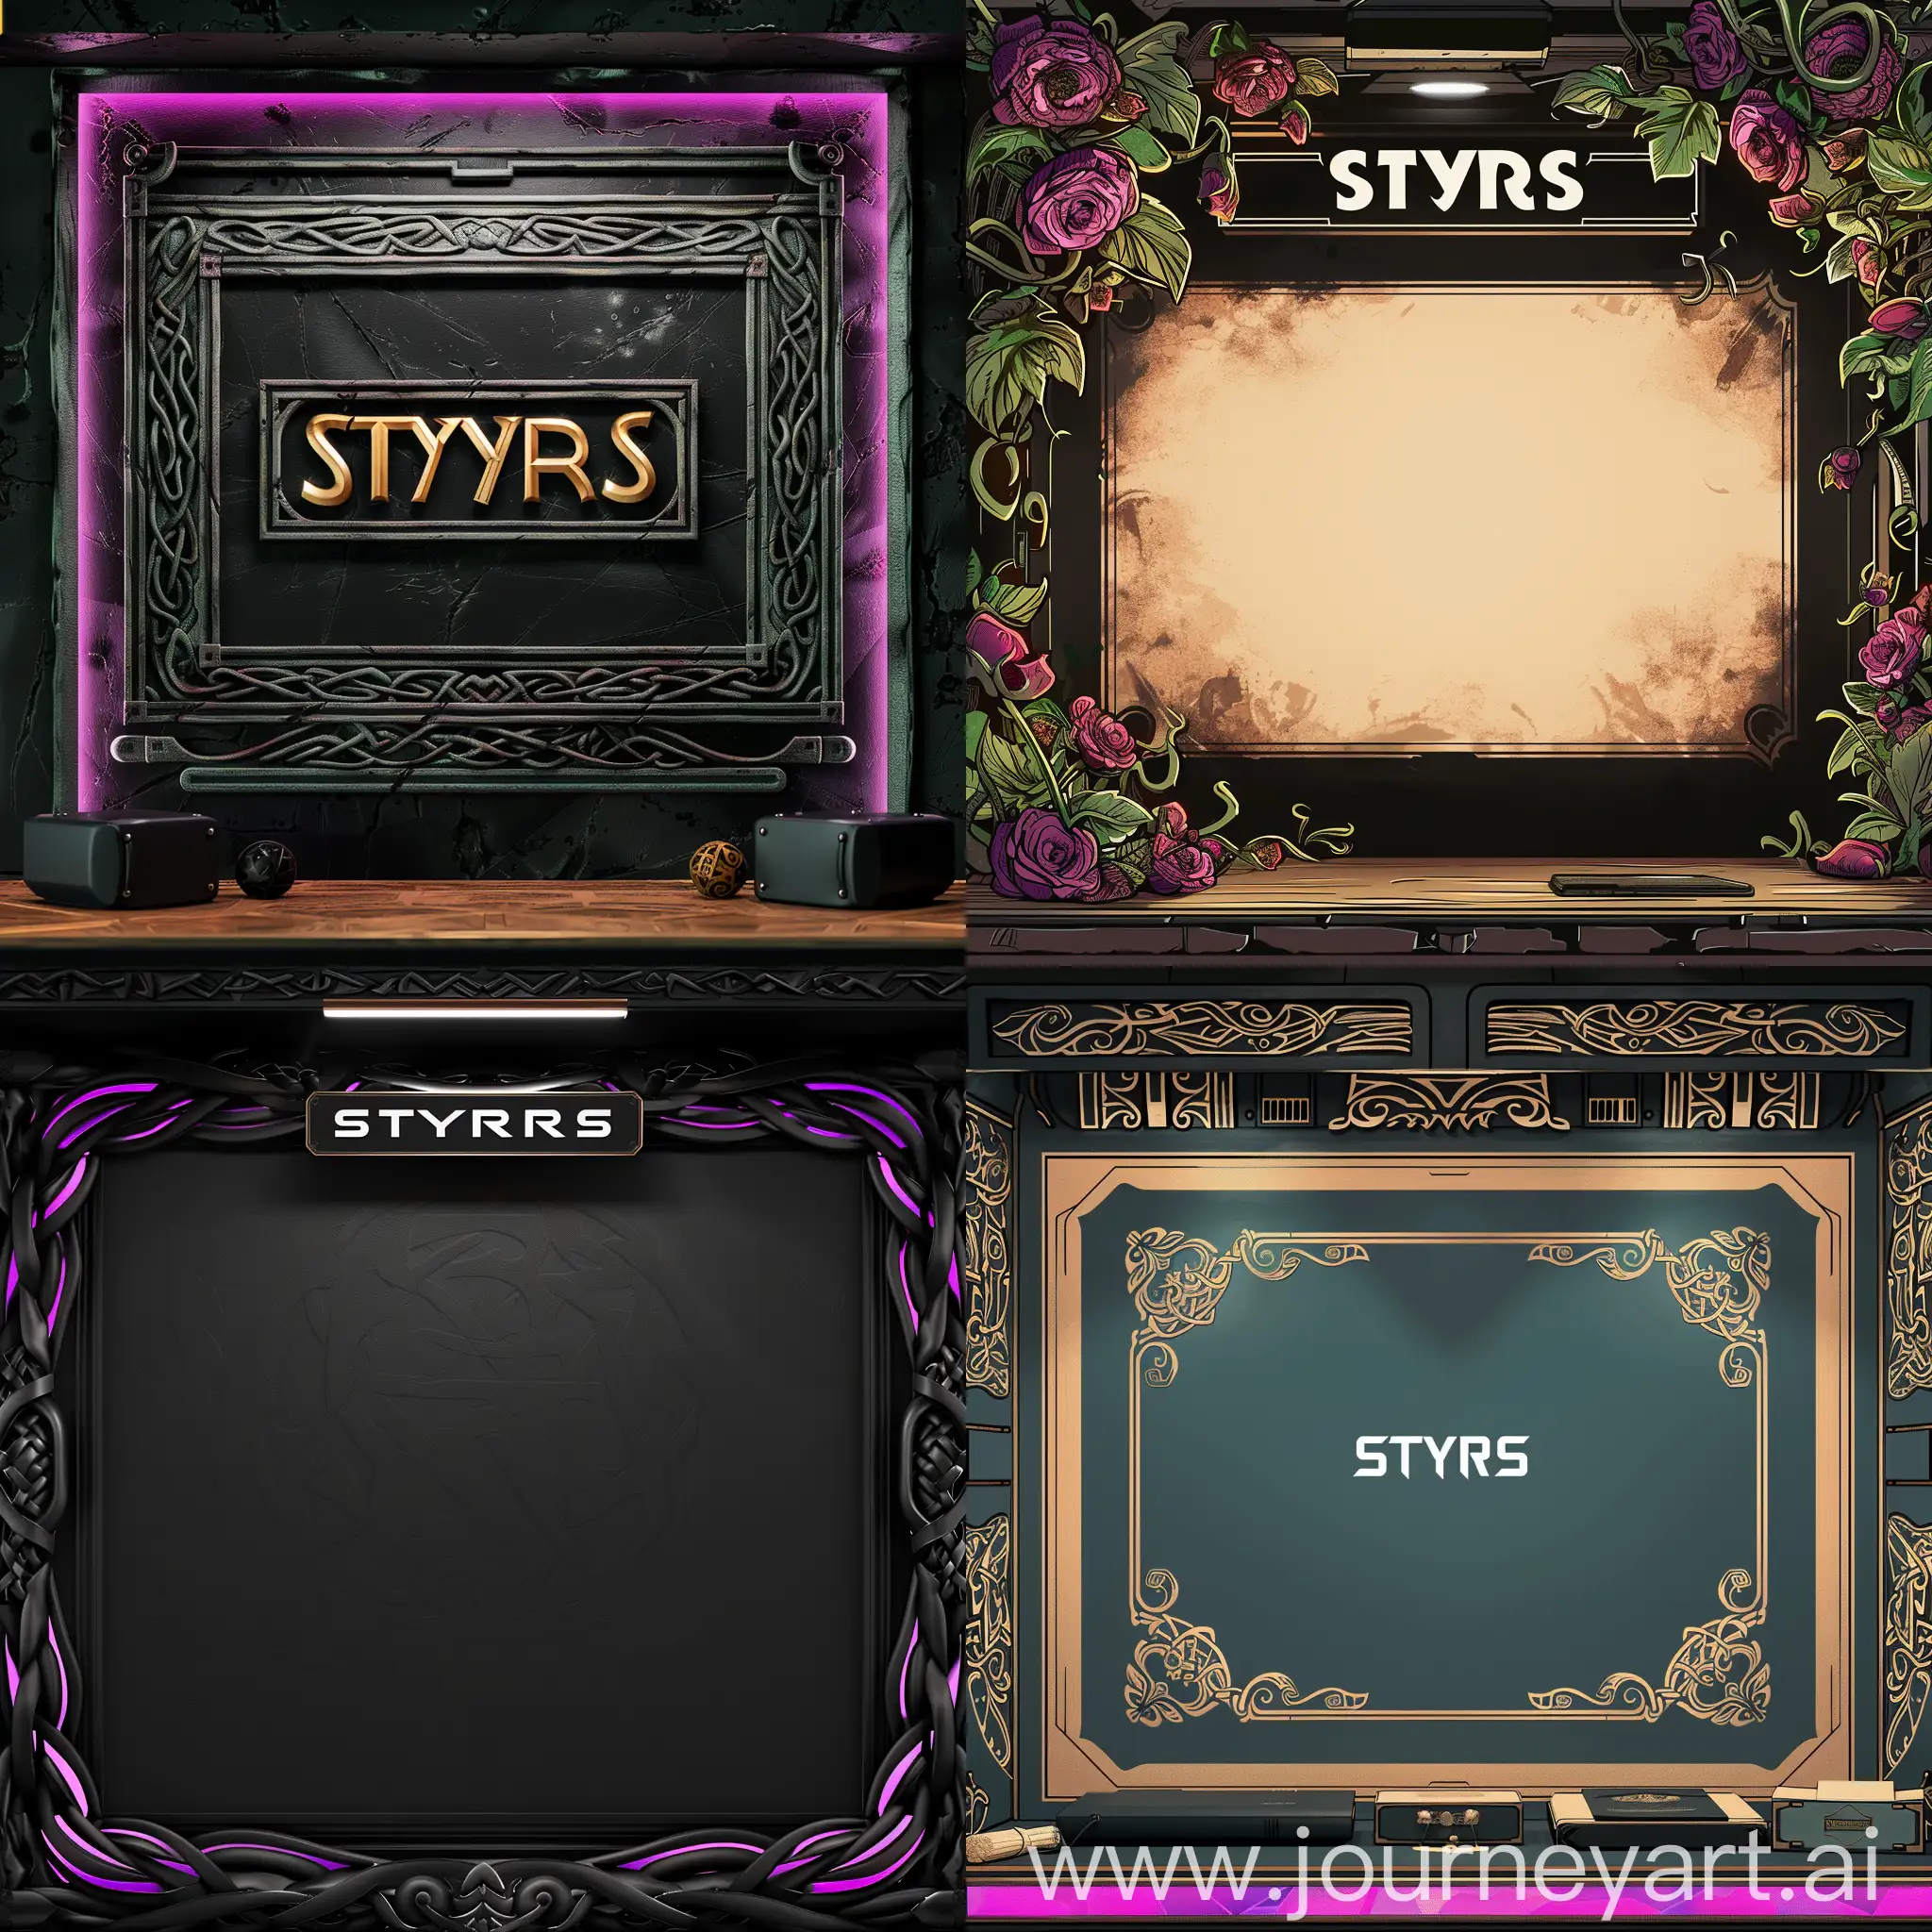 Twitch-Streaming-Setup-with-Styrs-Inscription